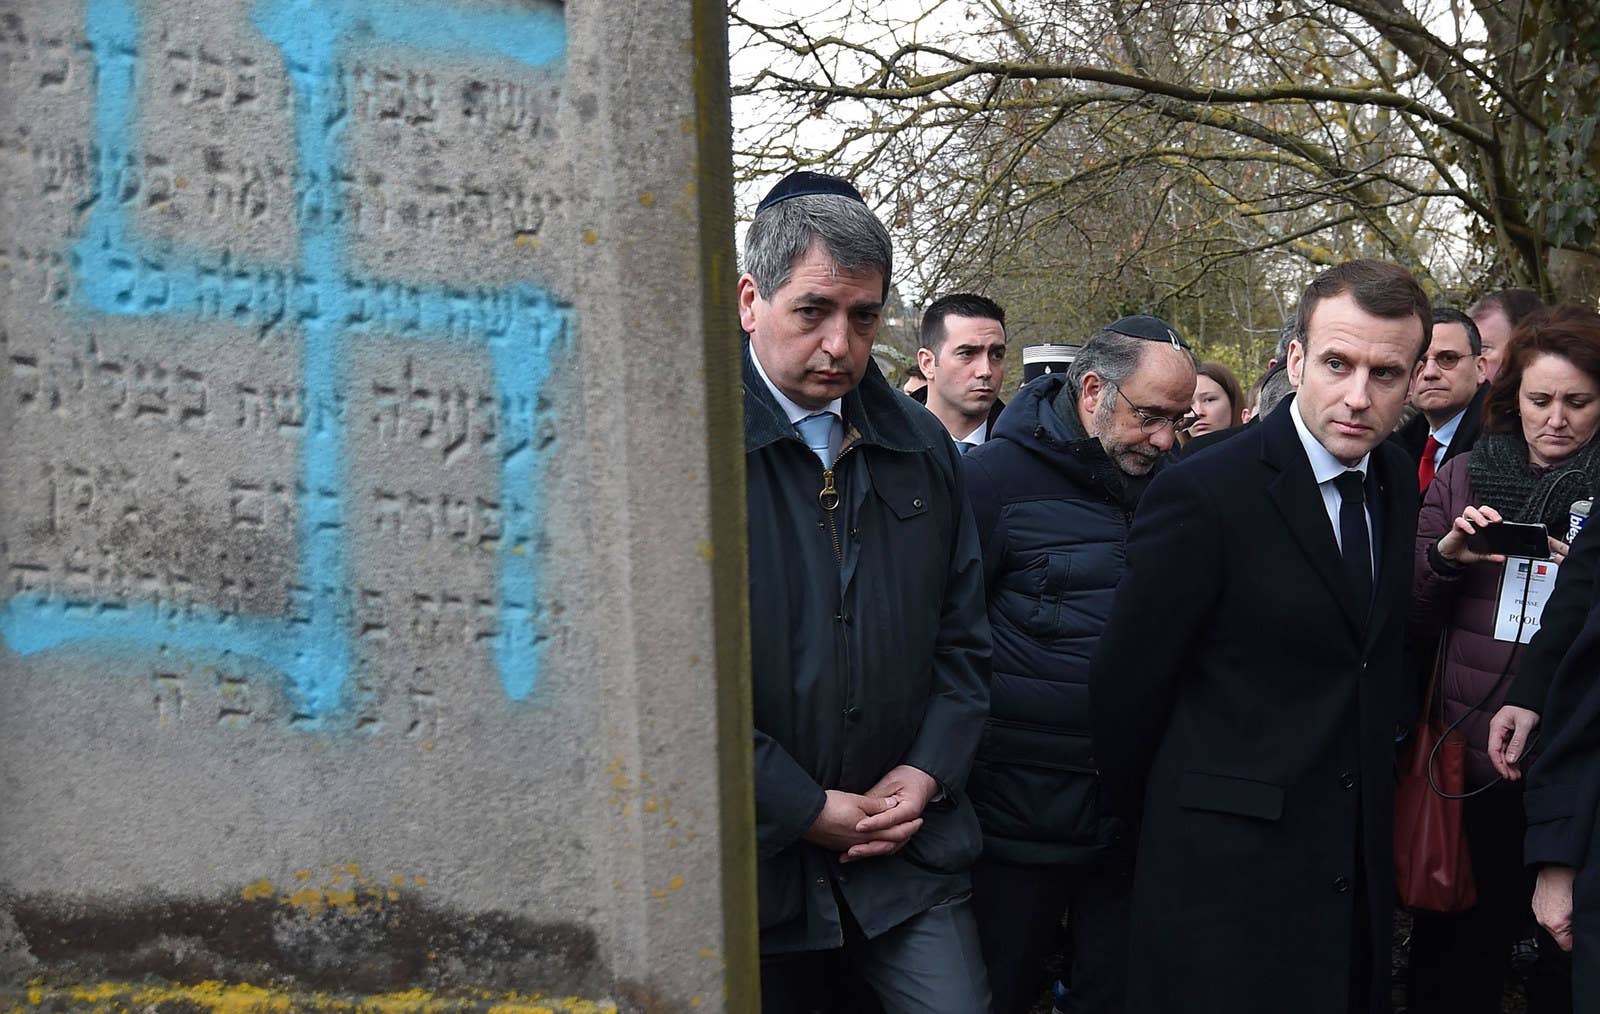 French President Emmanuel Macron looks at a grave vandalized with a swastika during a visit at the Jewish cemetery in Quatzenheim, France, on Feb. 19.